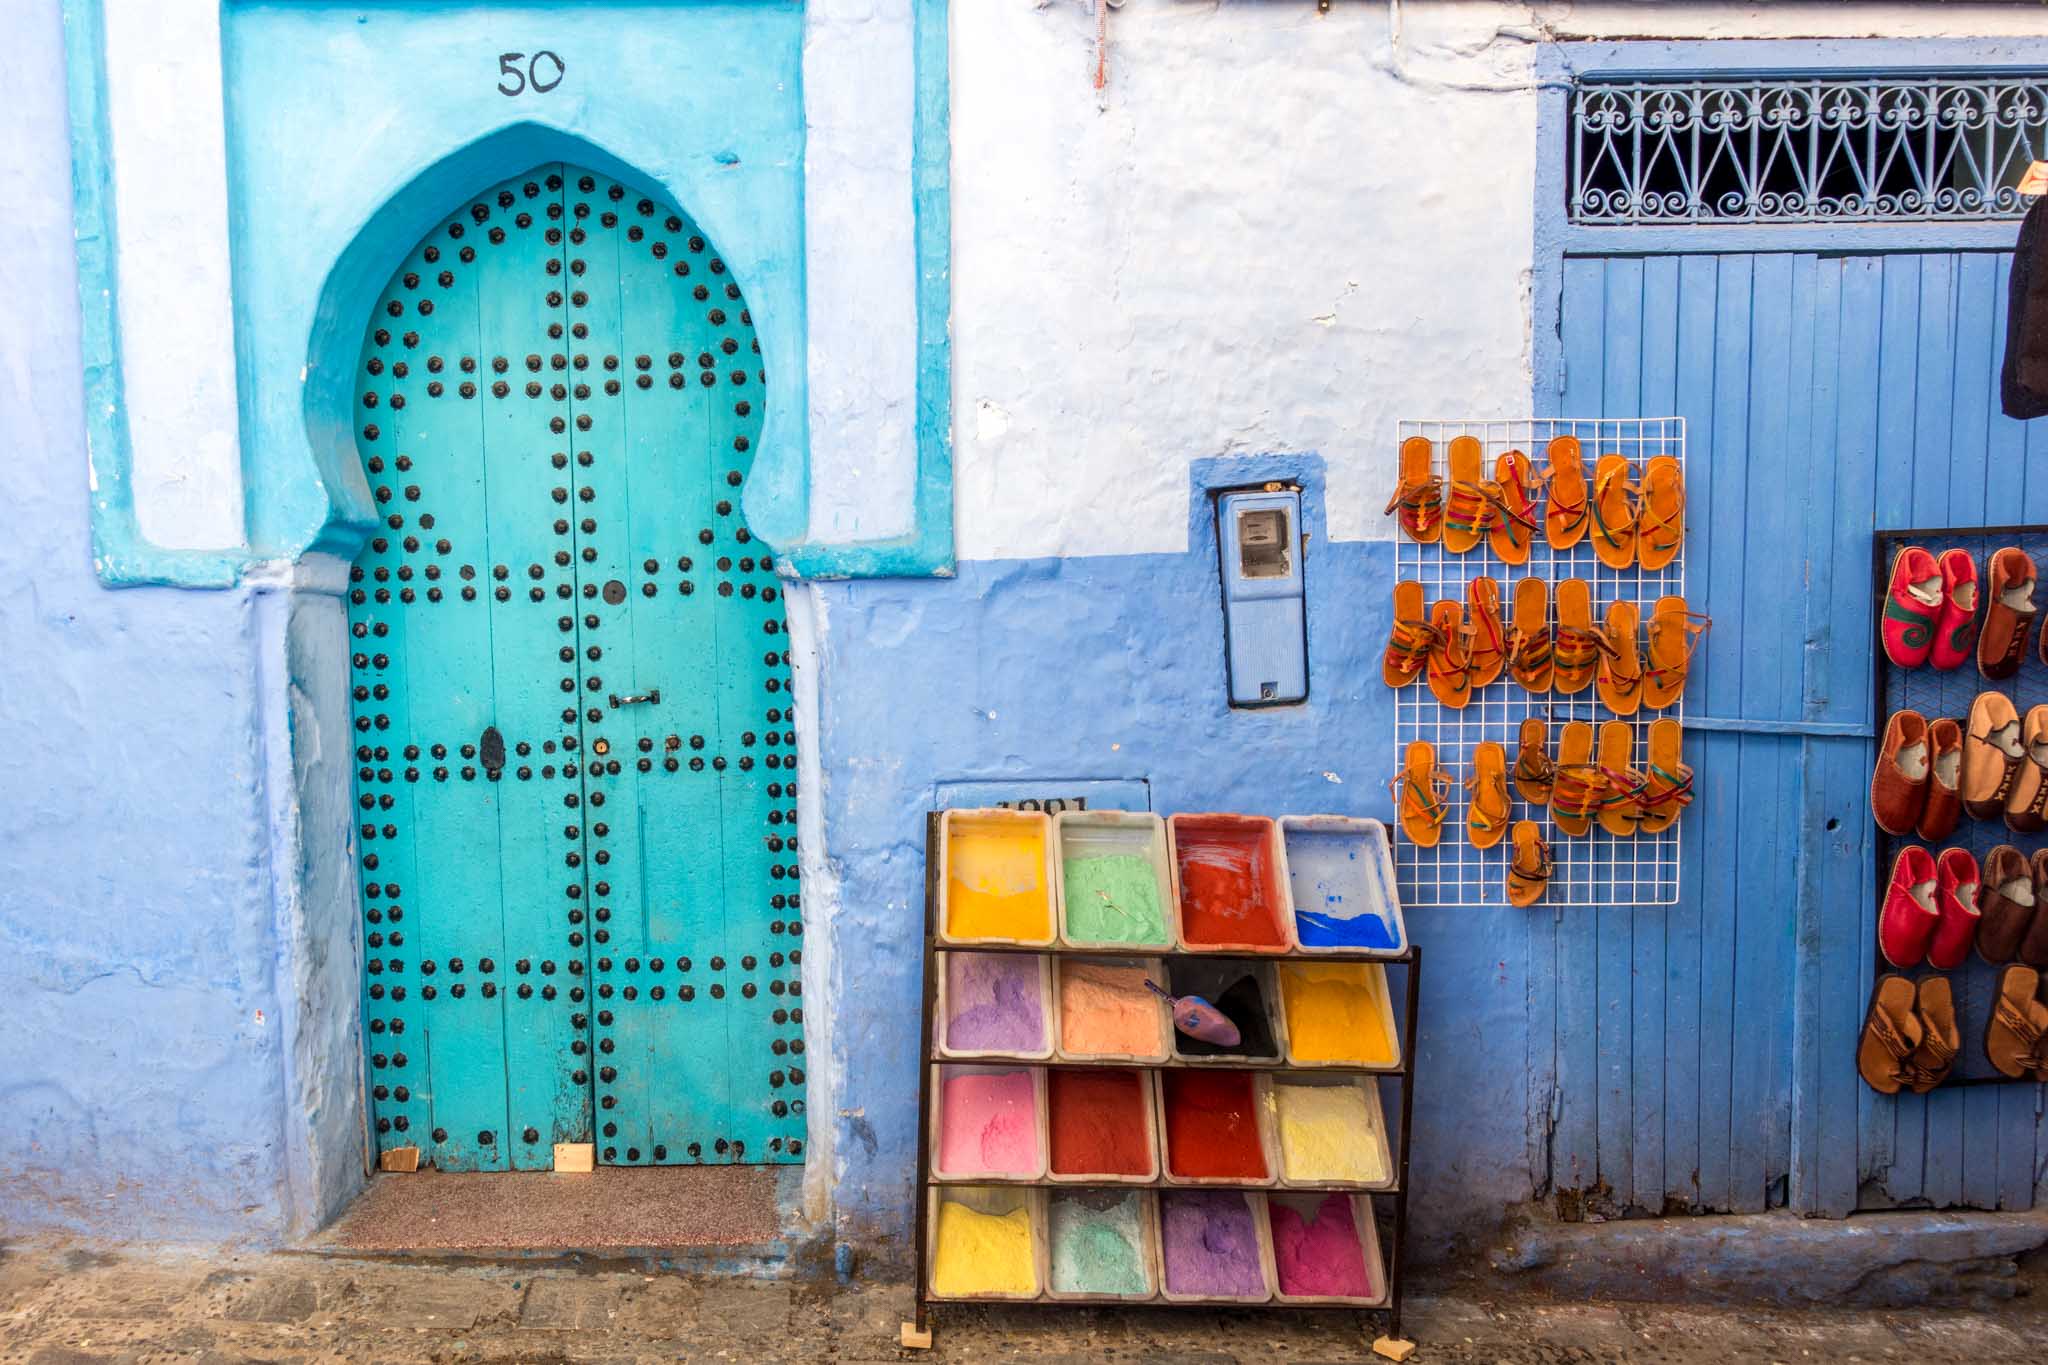 Multi-colored pigments and sandals for sale next to a turquoise door